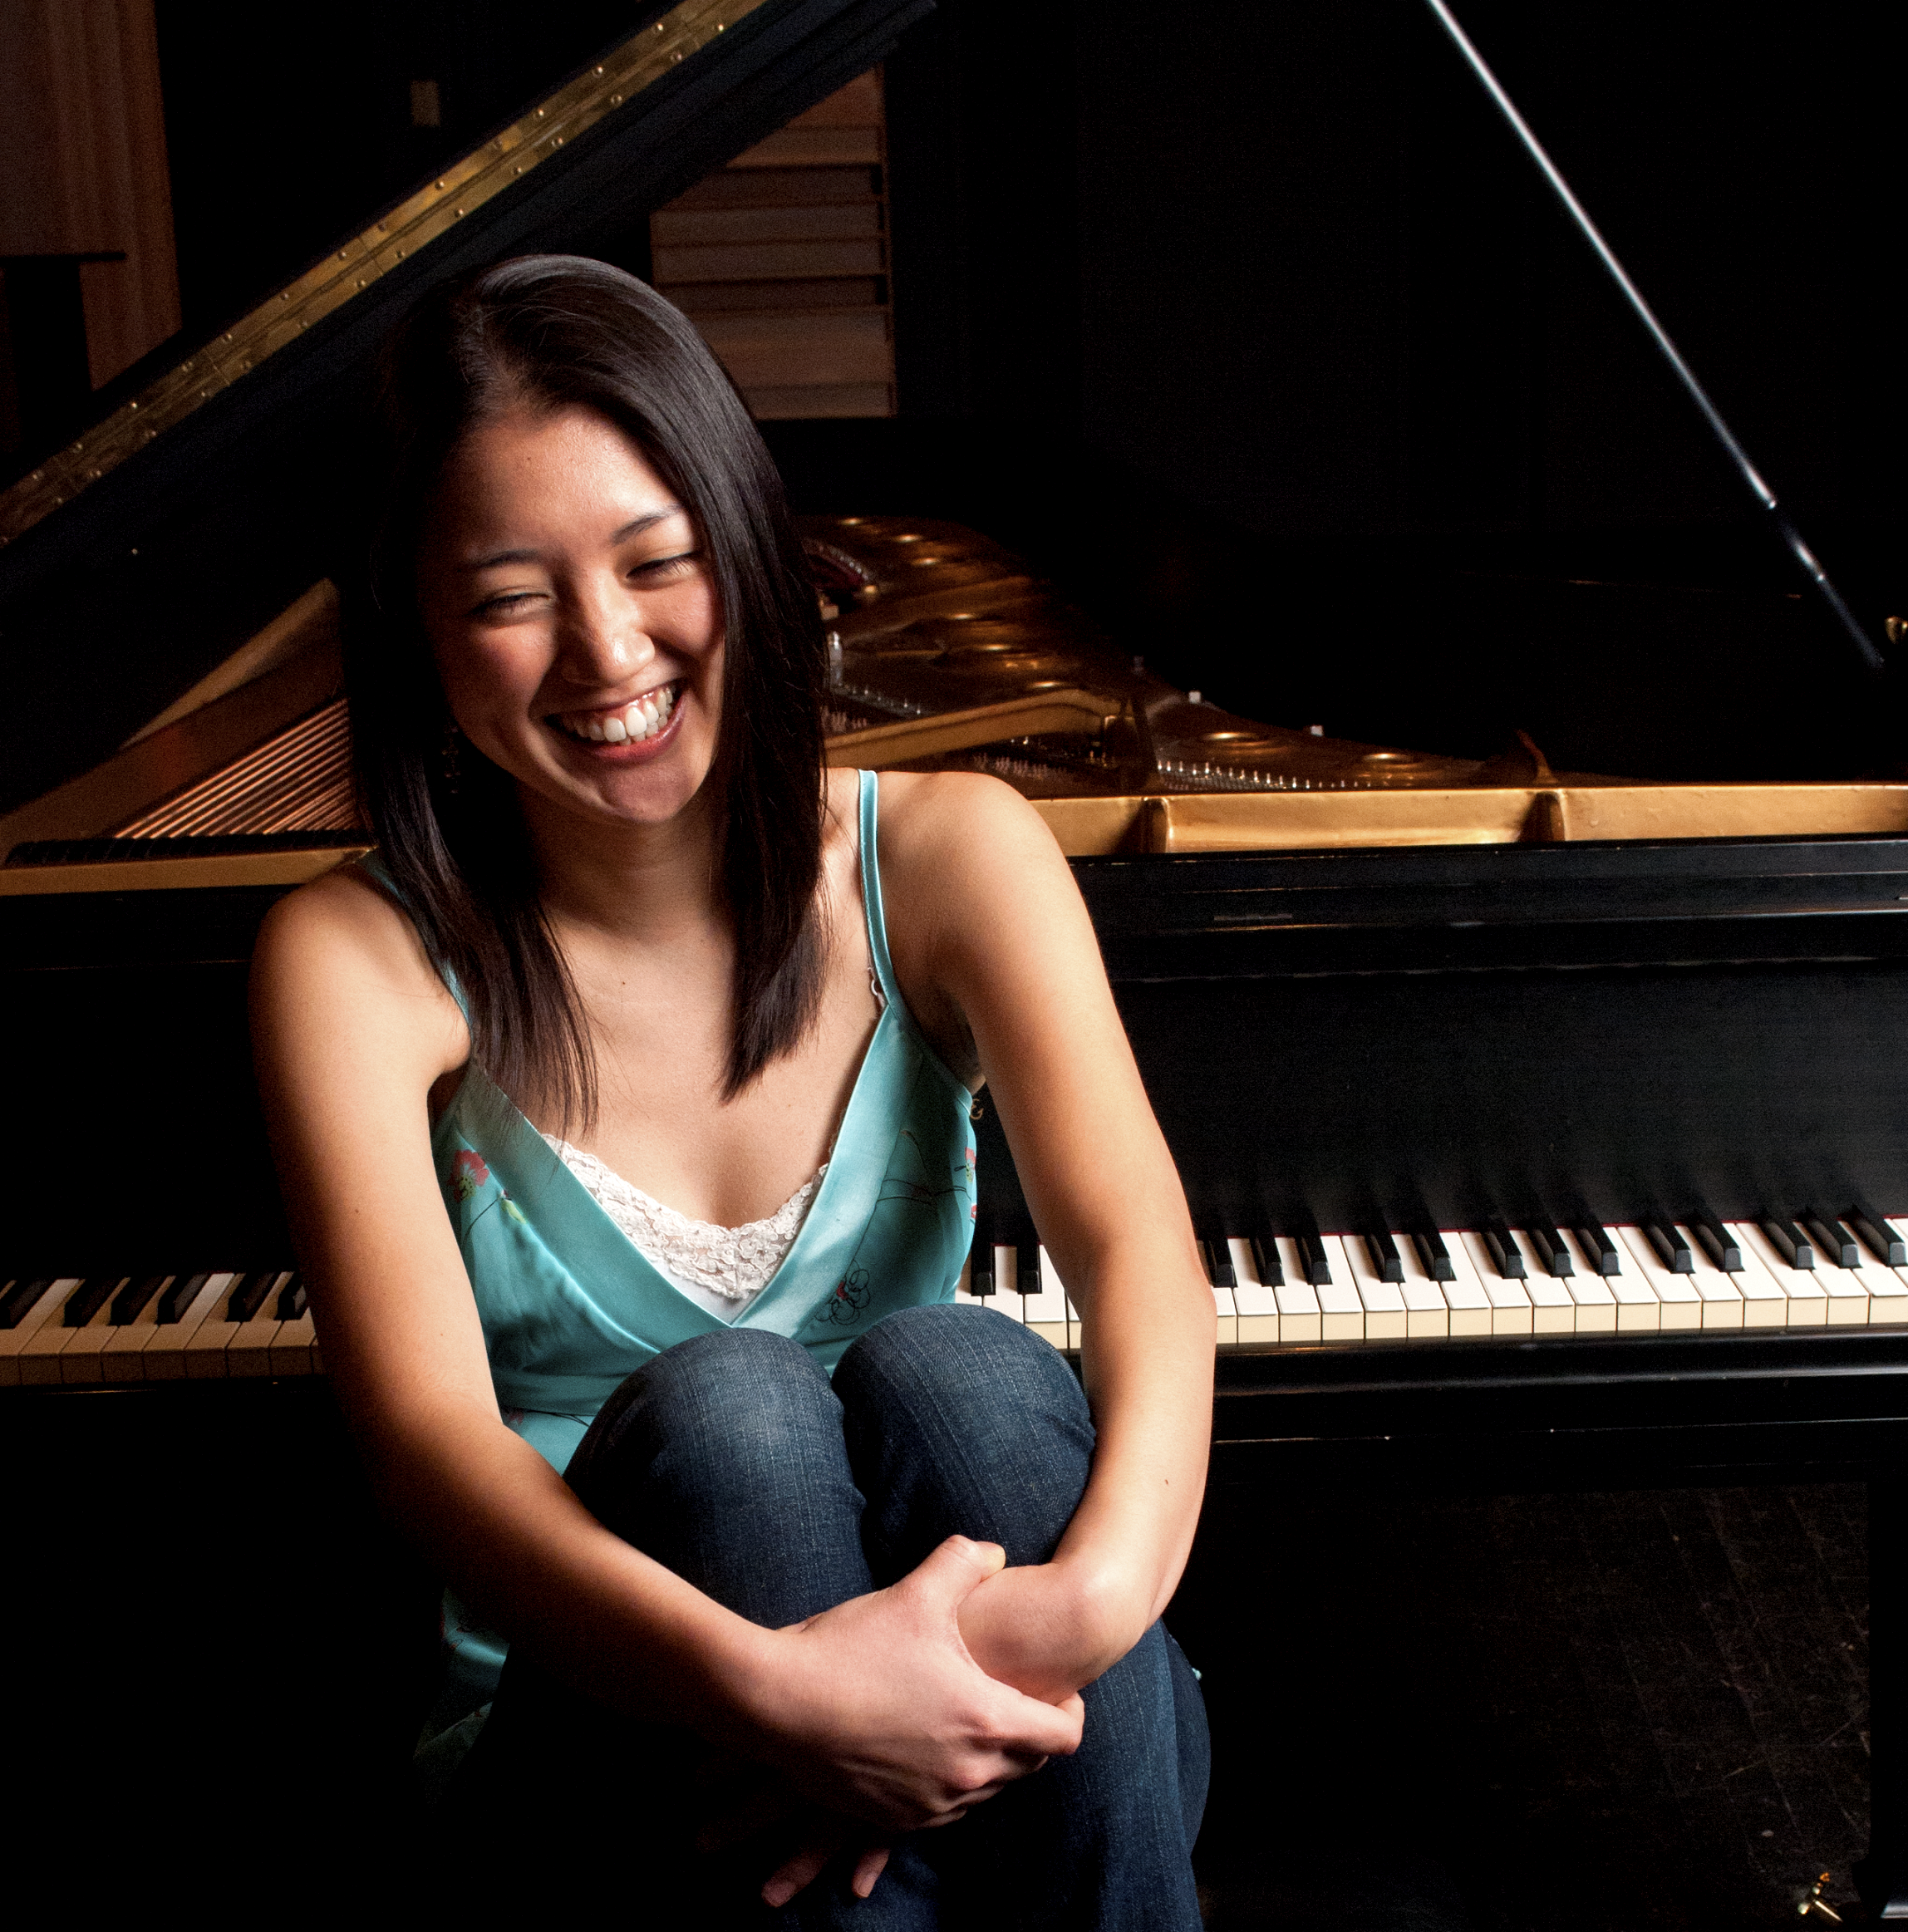 Classical pianist Miki Sawada poses with a piano in an undated portrait. Sawada will be traveling with a piano to perform free shows at several Kenai Peninsula venues during the coming week.